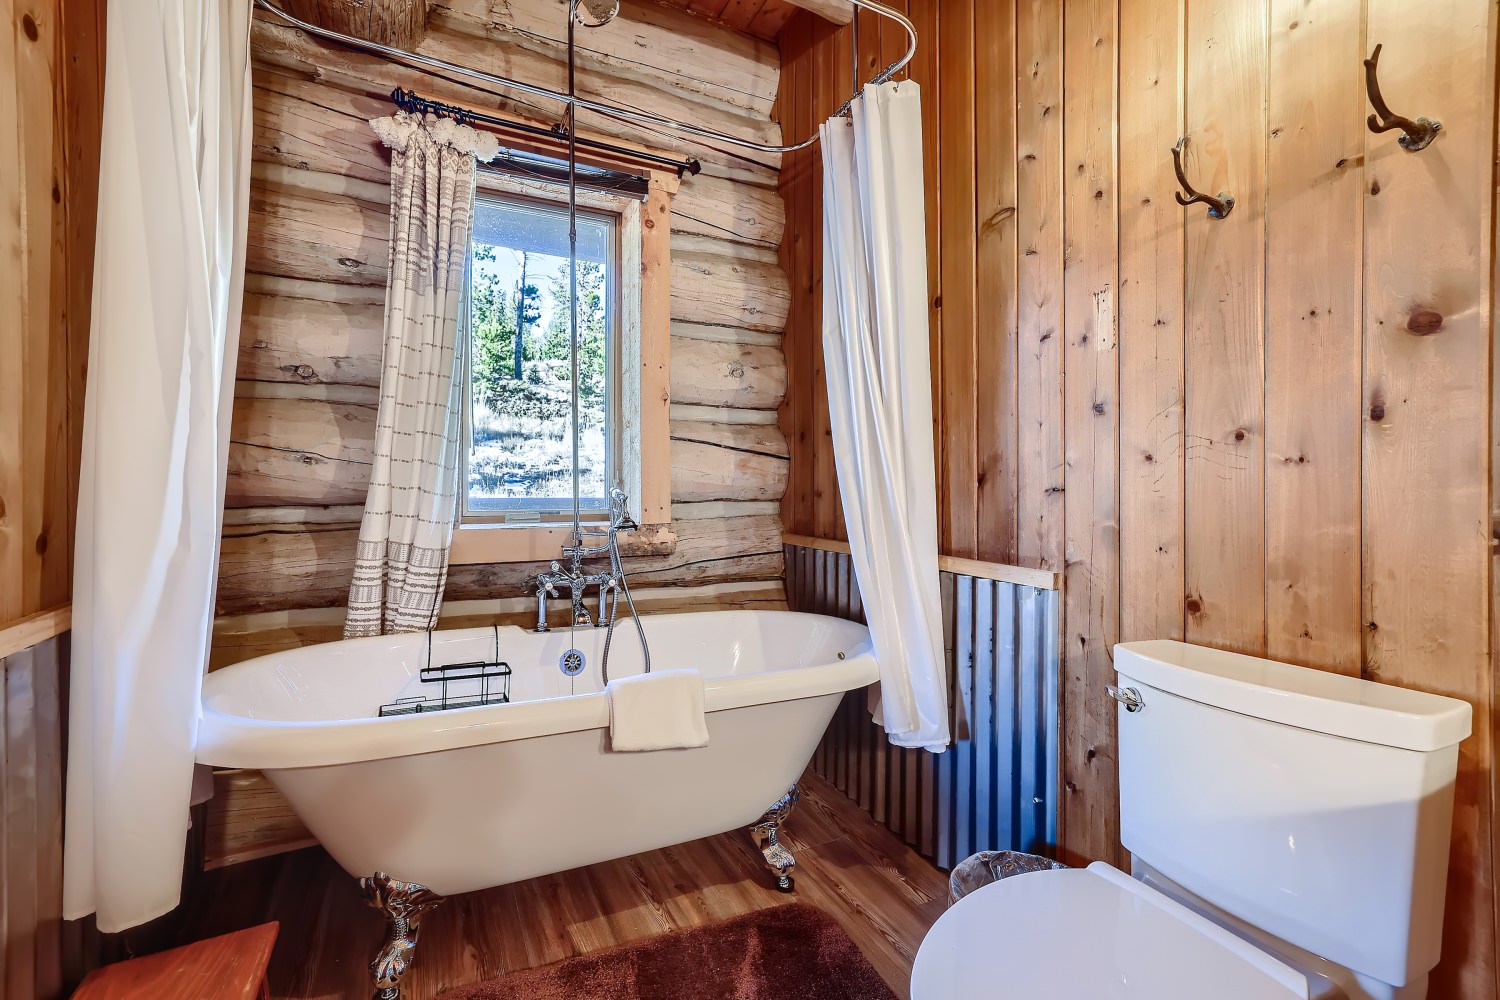 Shared bathroom on the main floor with claw foot tub, and shower combo